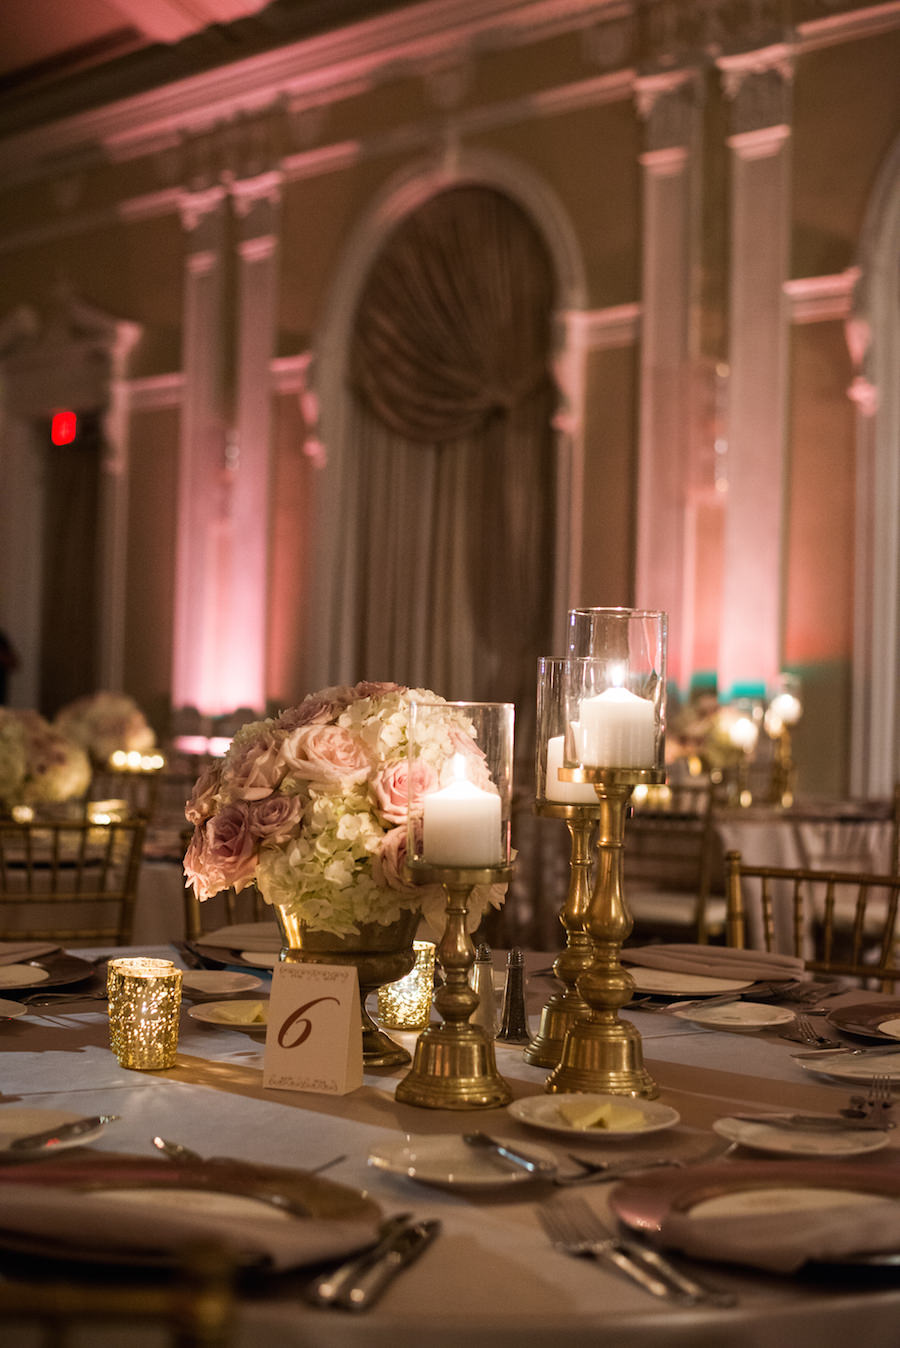 Wedding Reception Table Decor with Ivory and Blush Floral Centerpieces and Gold Candelabras